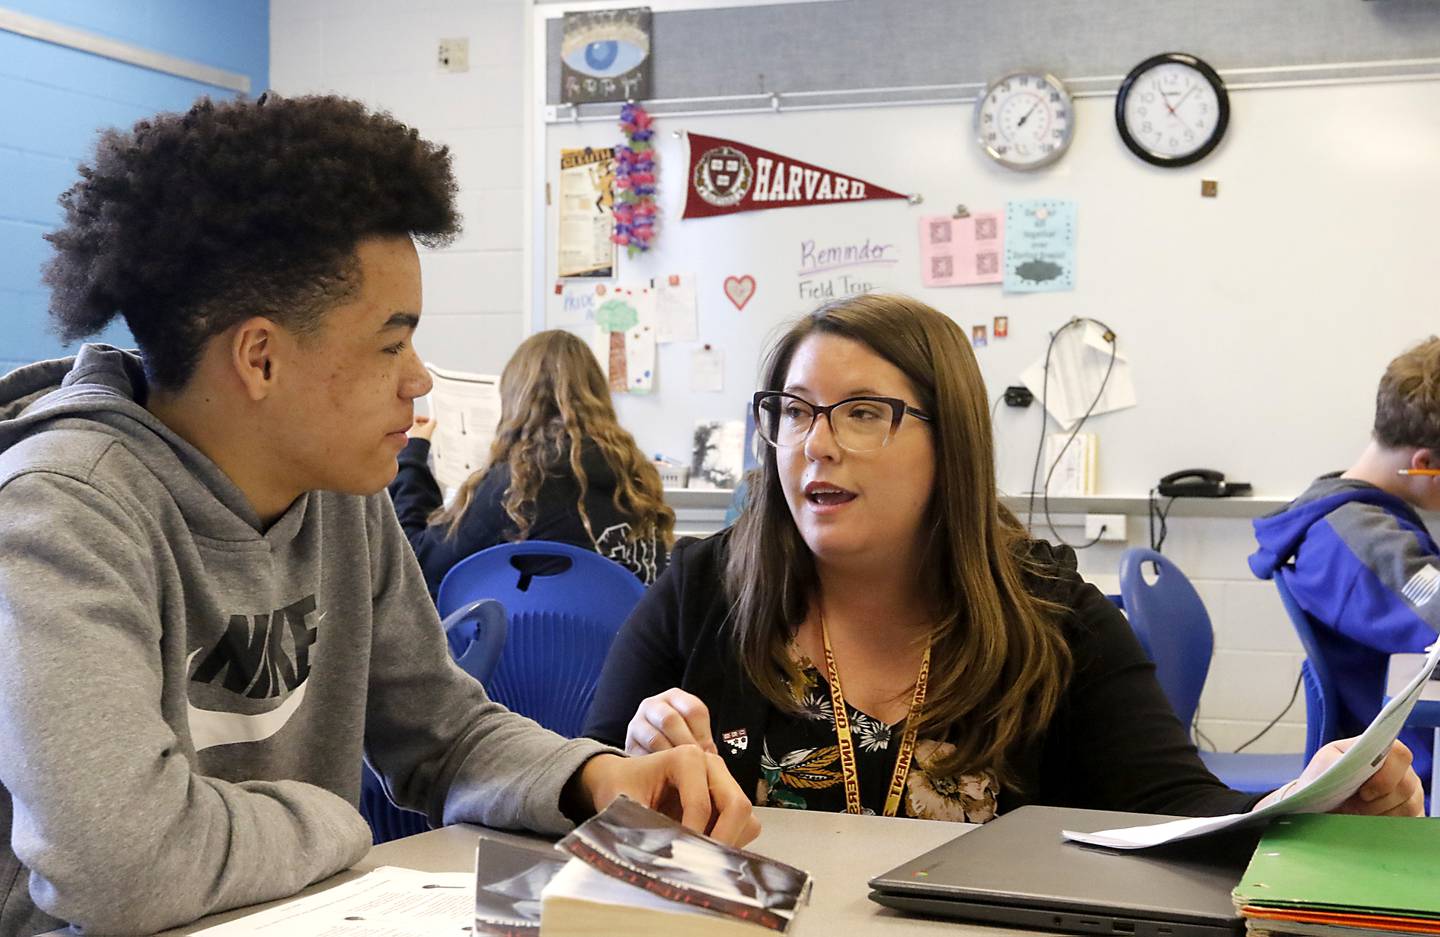 Megan McDaniel, who recently received her Master of Arts degree from Harvard University, works with Jacobe King as she teaches a literacy class Wednesday, April 19, 2023, at Northwood Middle School in Woodstock.